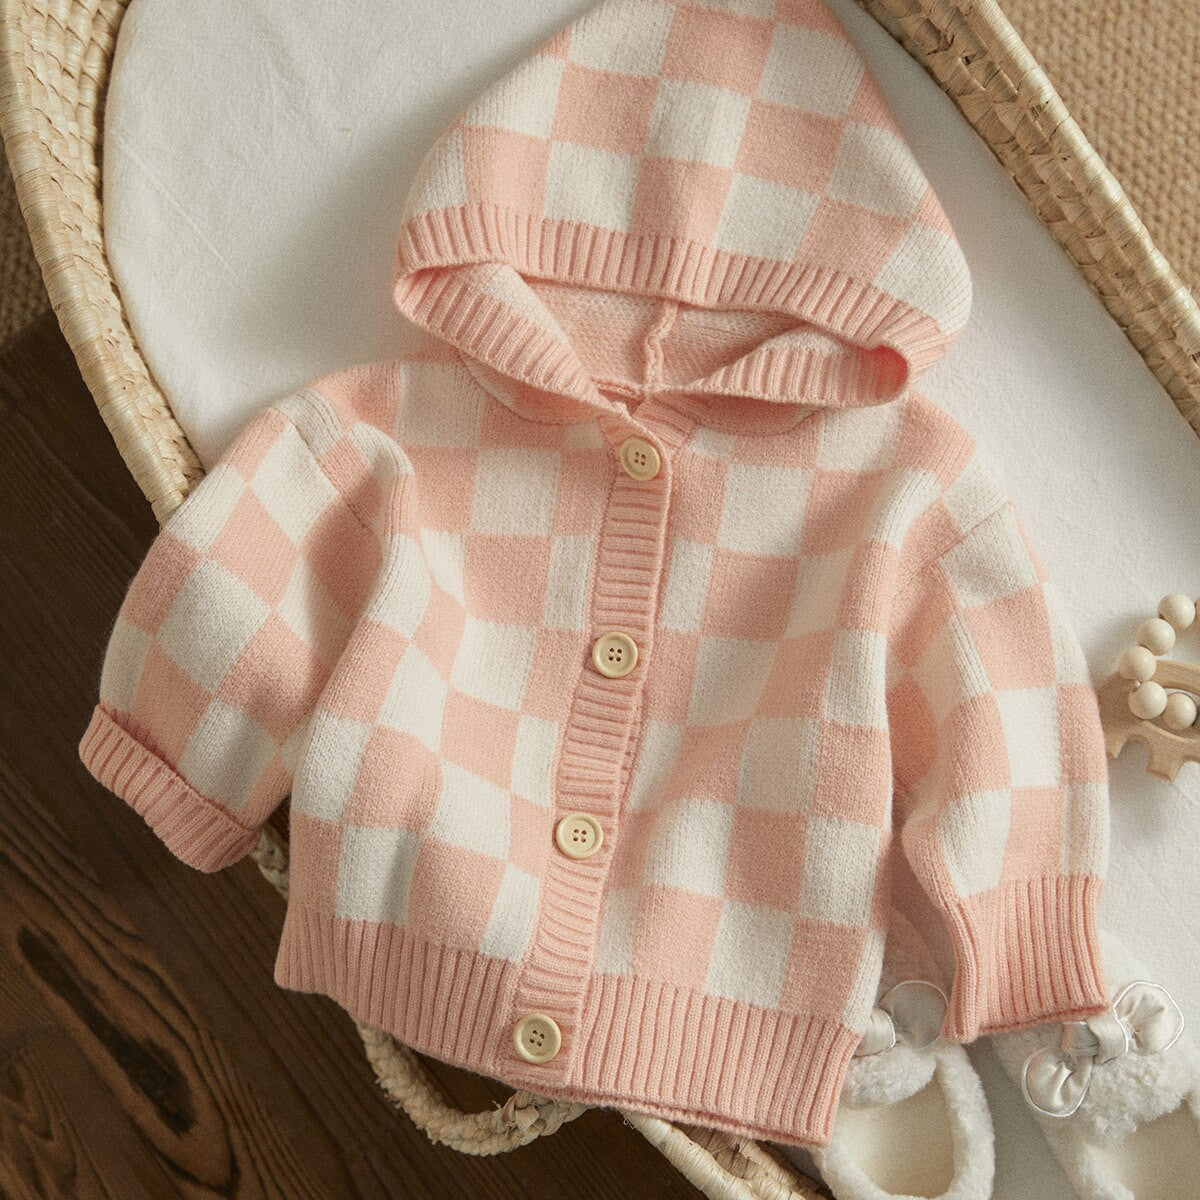 Checked Toddler Girl Knit Sweater